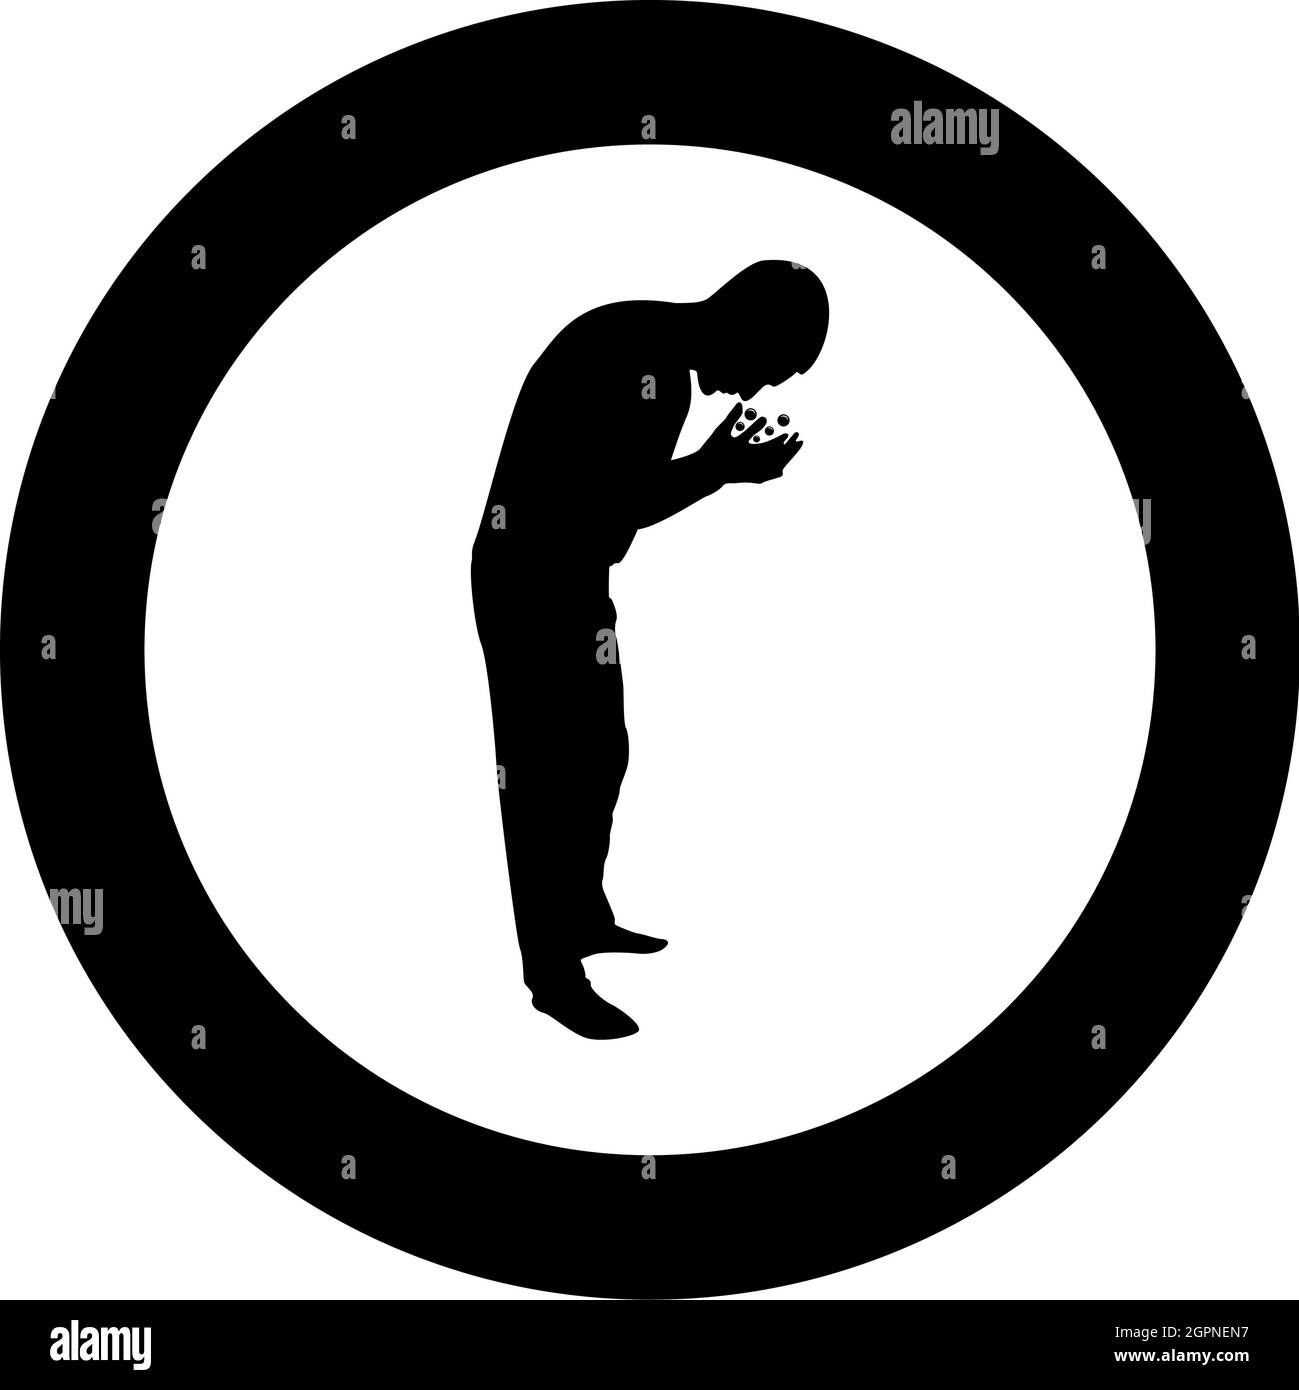 Man wash face water Male cleansing facial Washes his Concept cares about his look Hygiene Bubbles in hand silhouette in circle round black color vector illustration solid outline style image Stock Vector